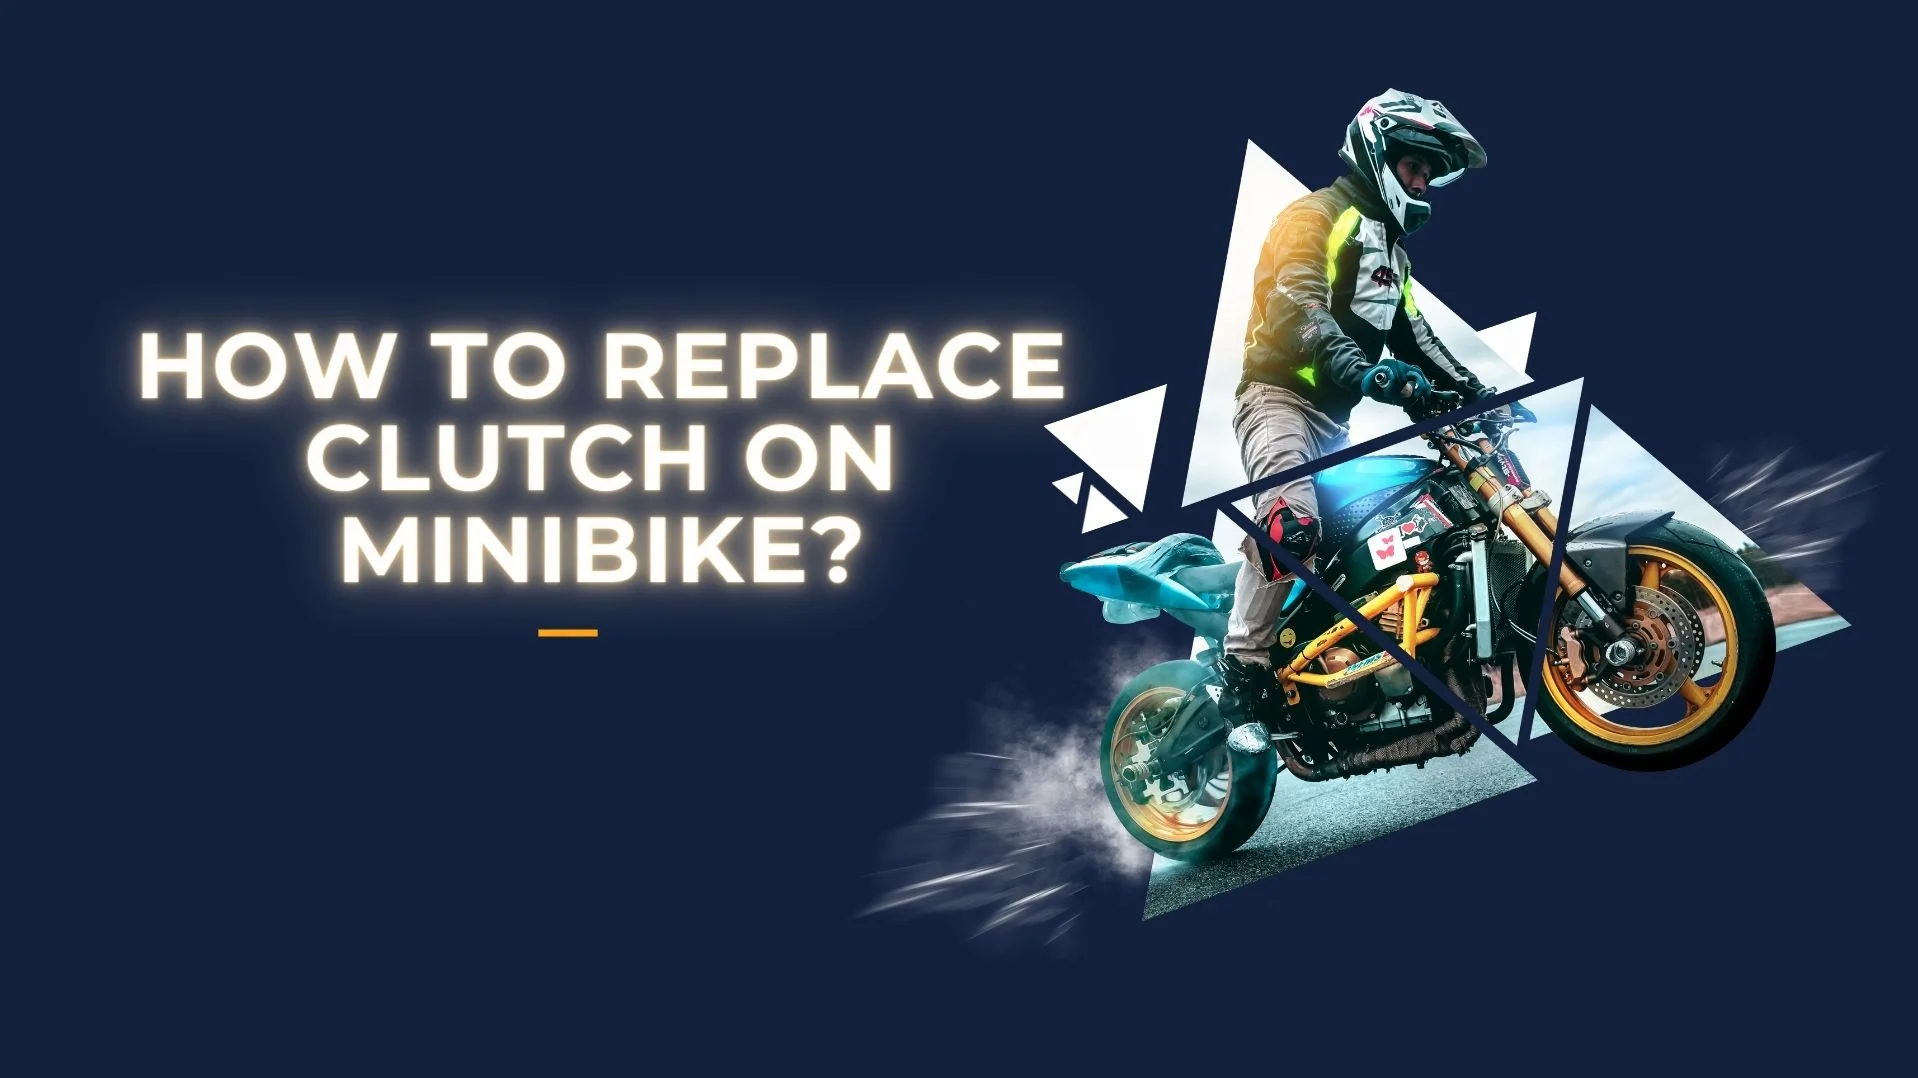 How To Replace Clutch on MiniBike?